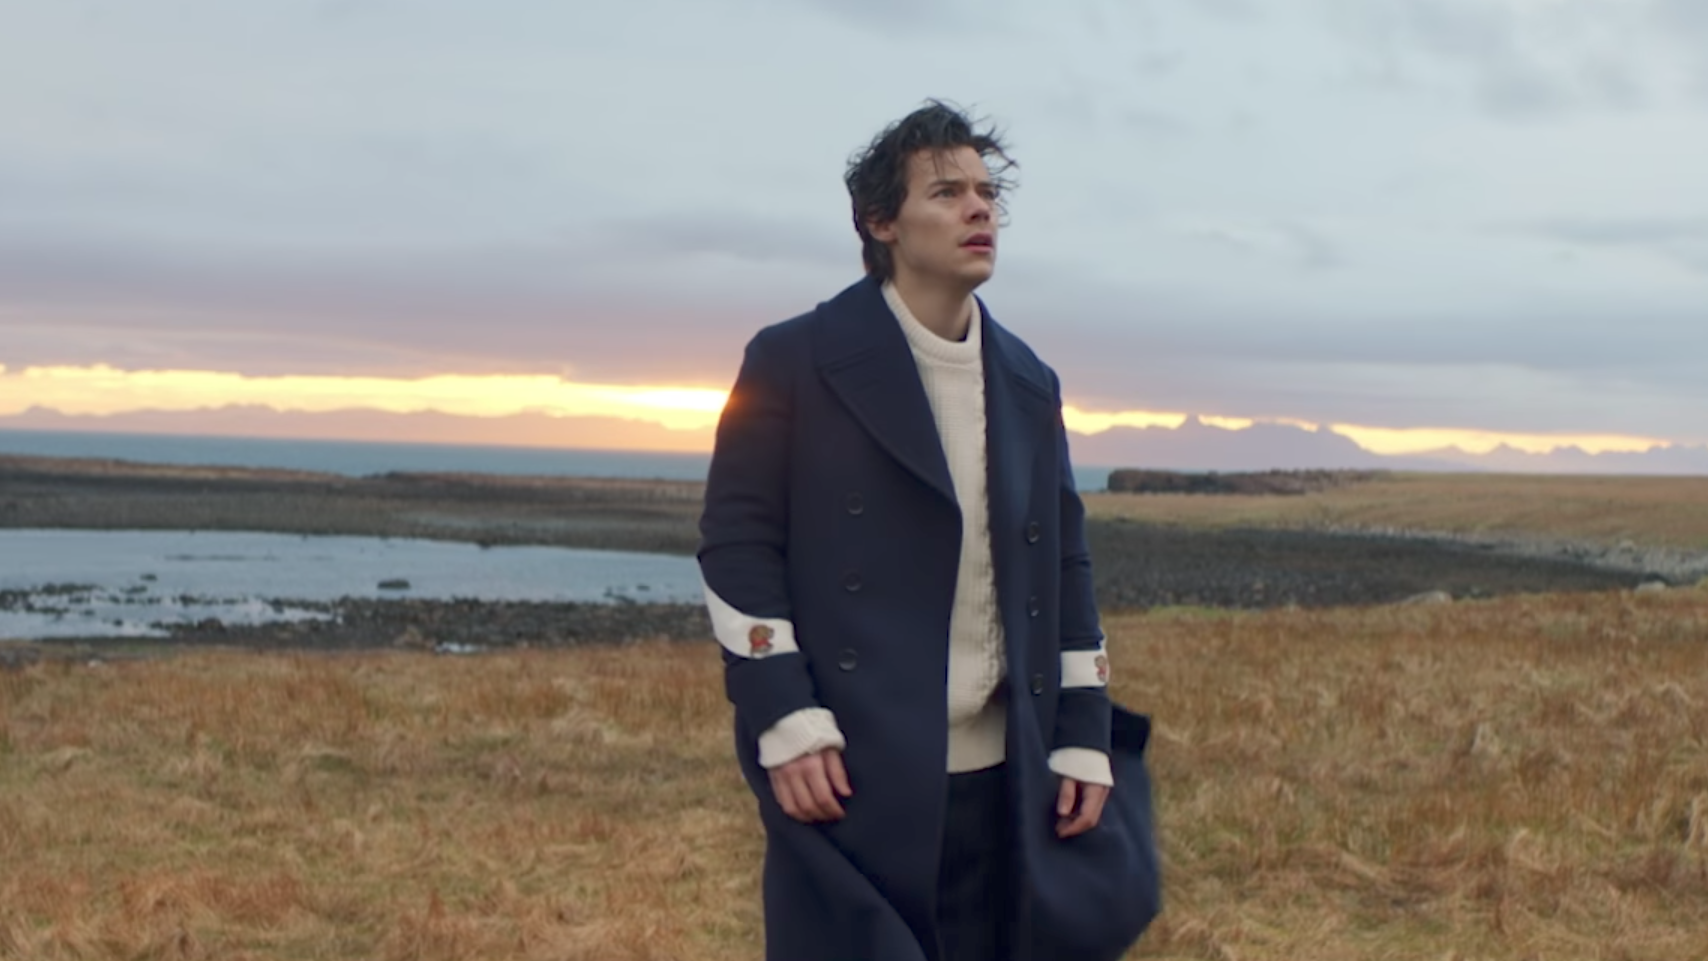 Capture from "Sign of the Times" music video of Harry standing in front of the sunset. 